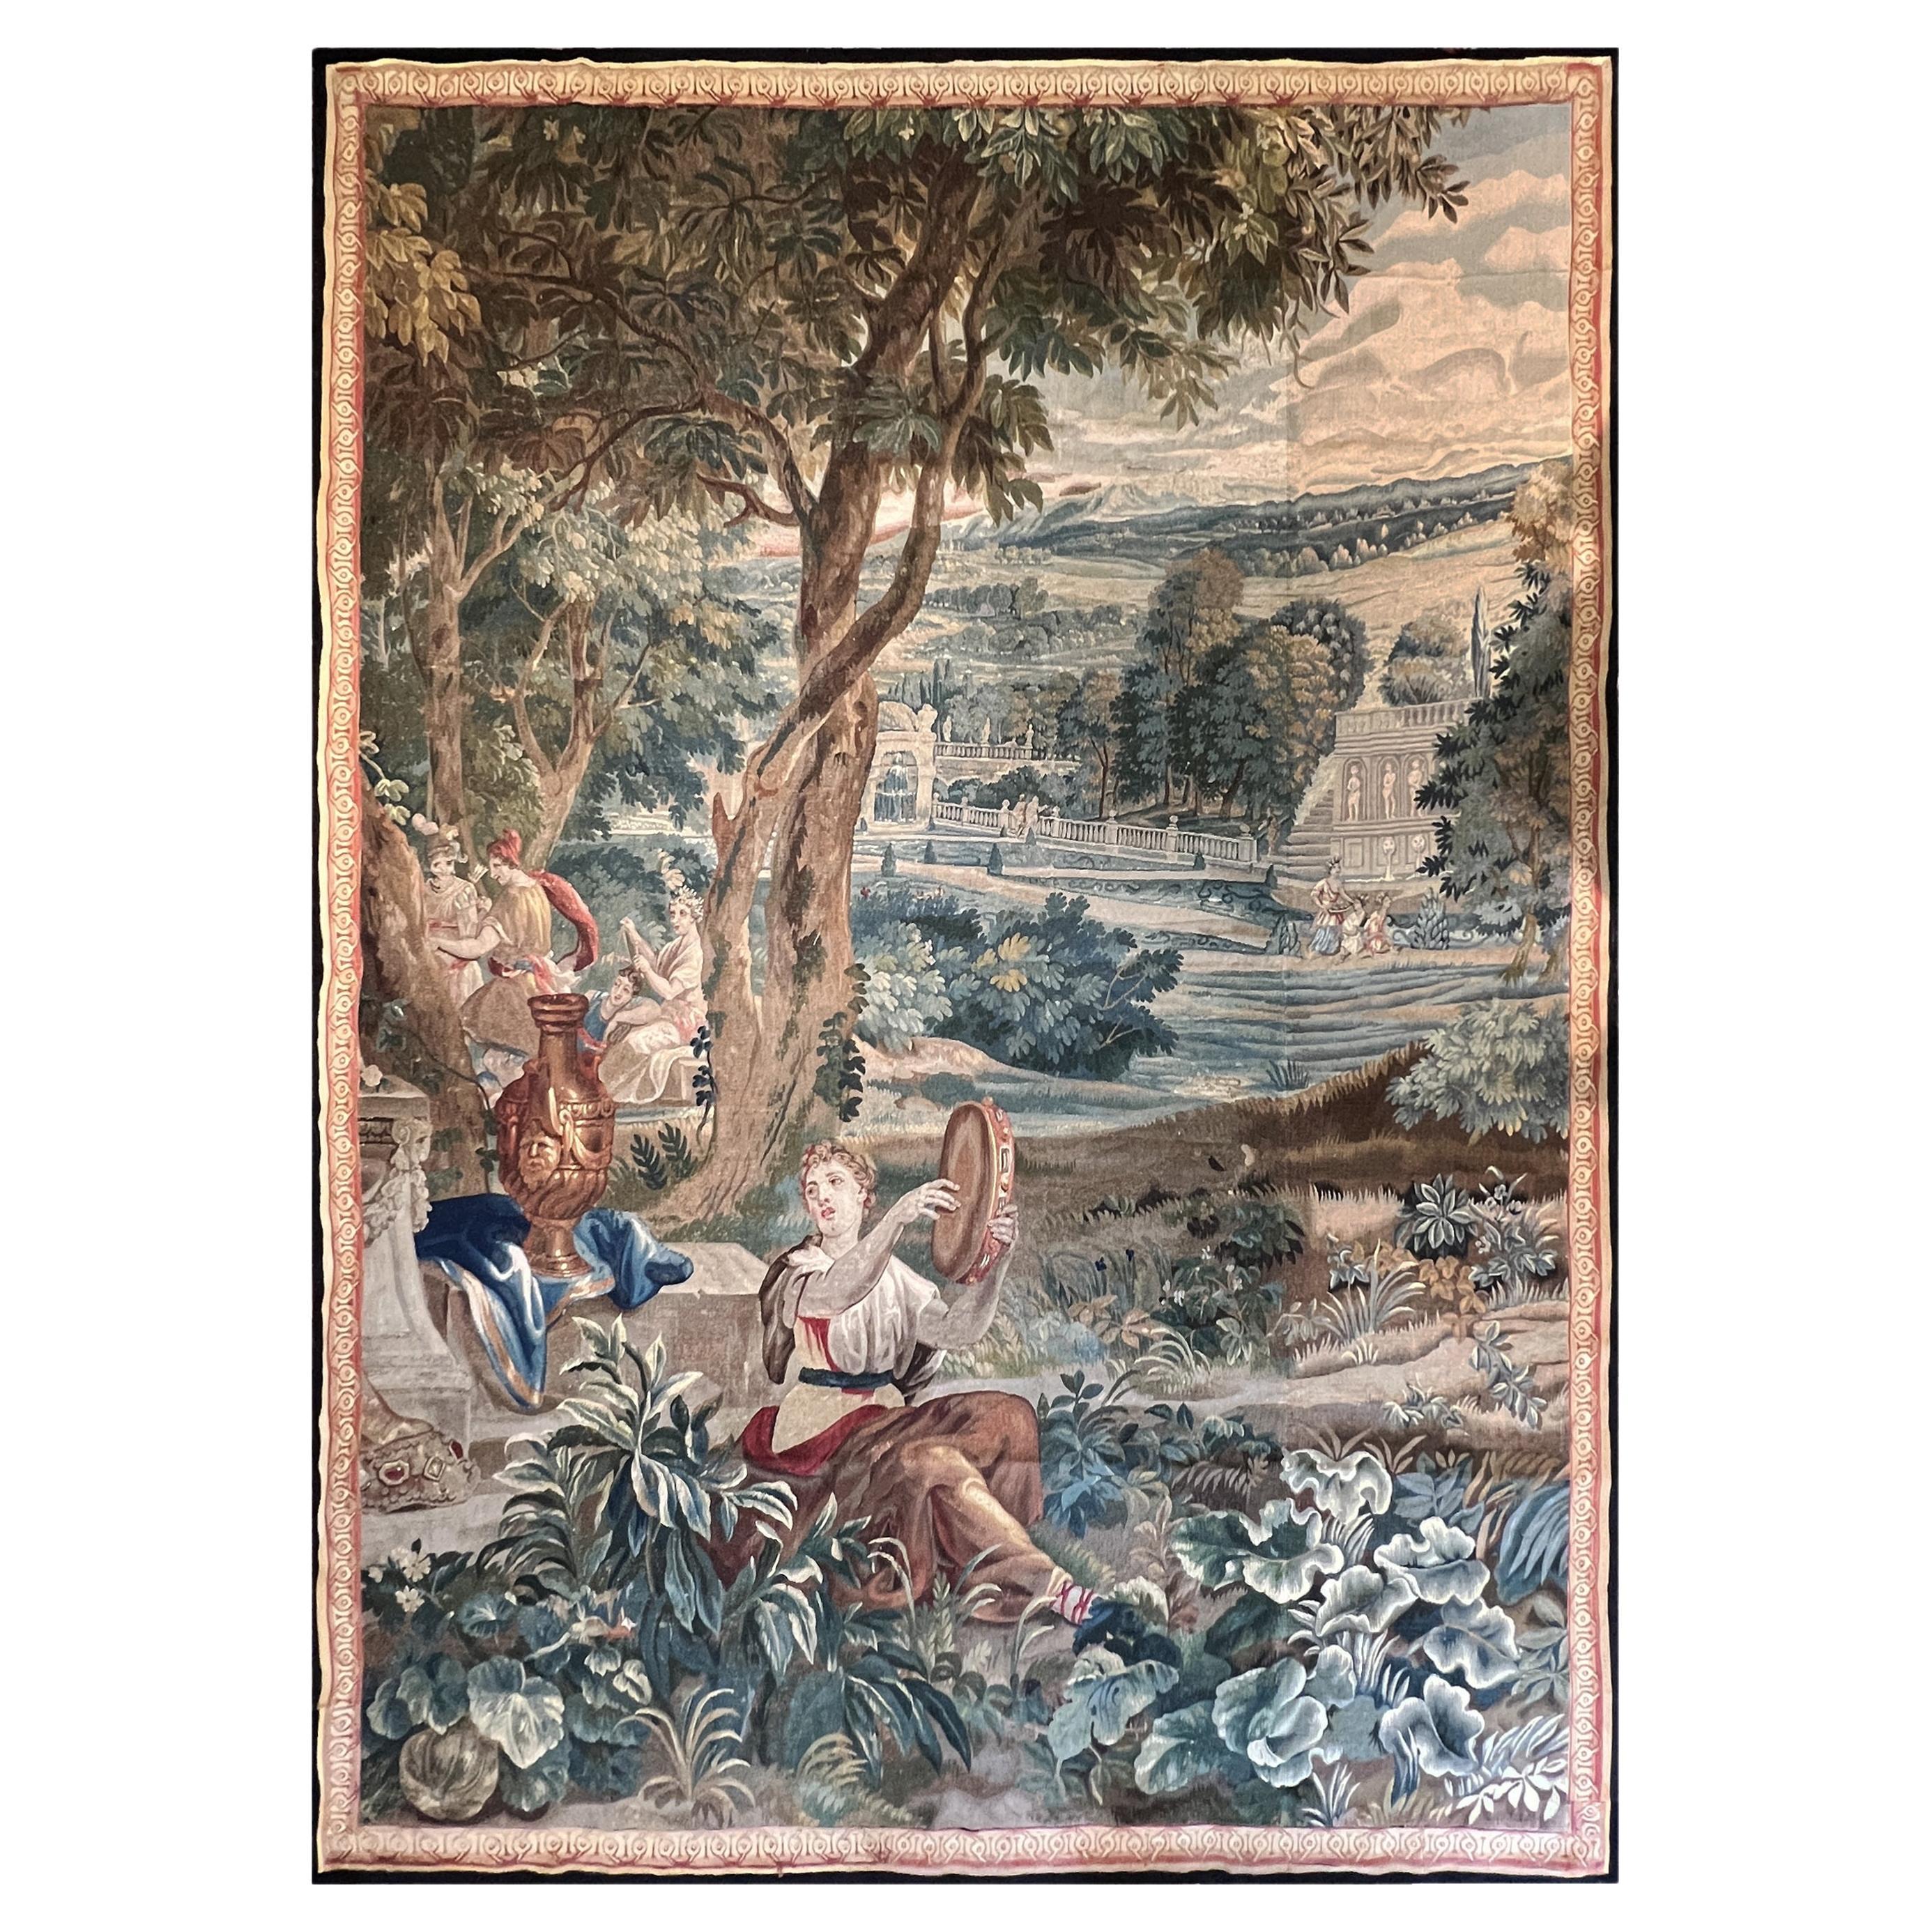 Beauvais Tapestry - The Tam-tam Player - 18th Century - N° 882